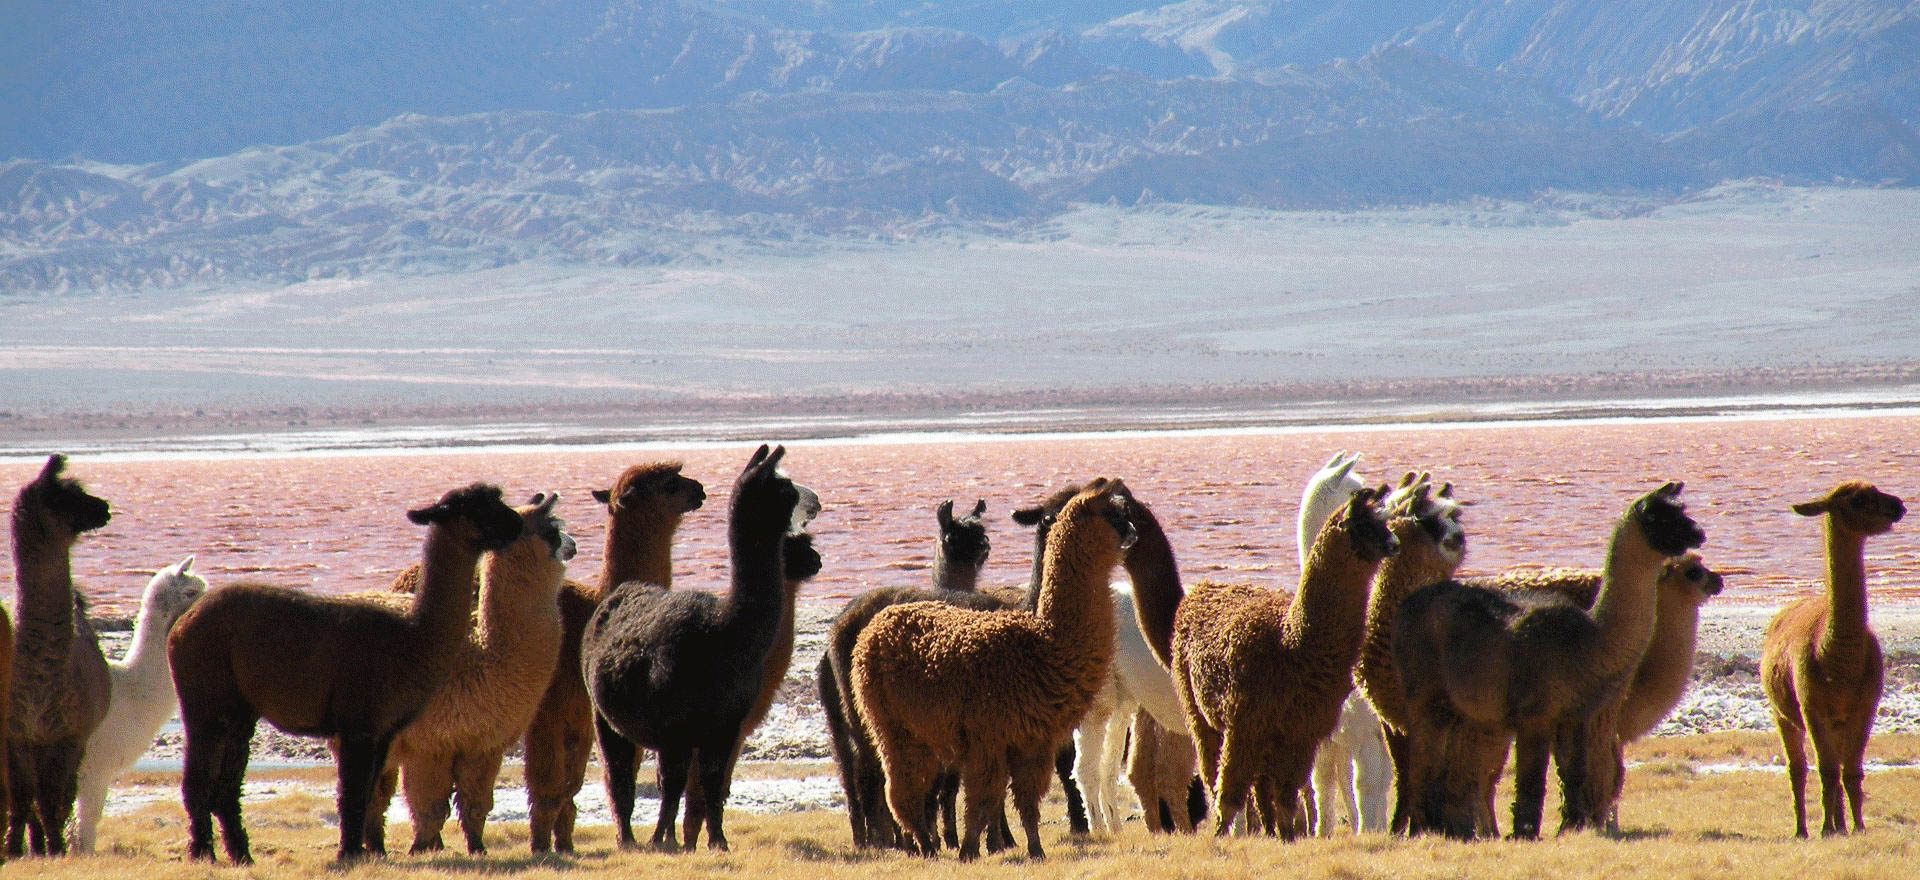 Argentina Holidays and Tours - Alpacas in the High Andes